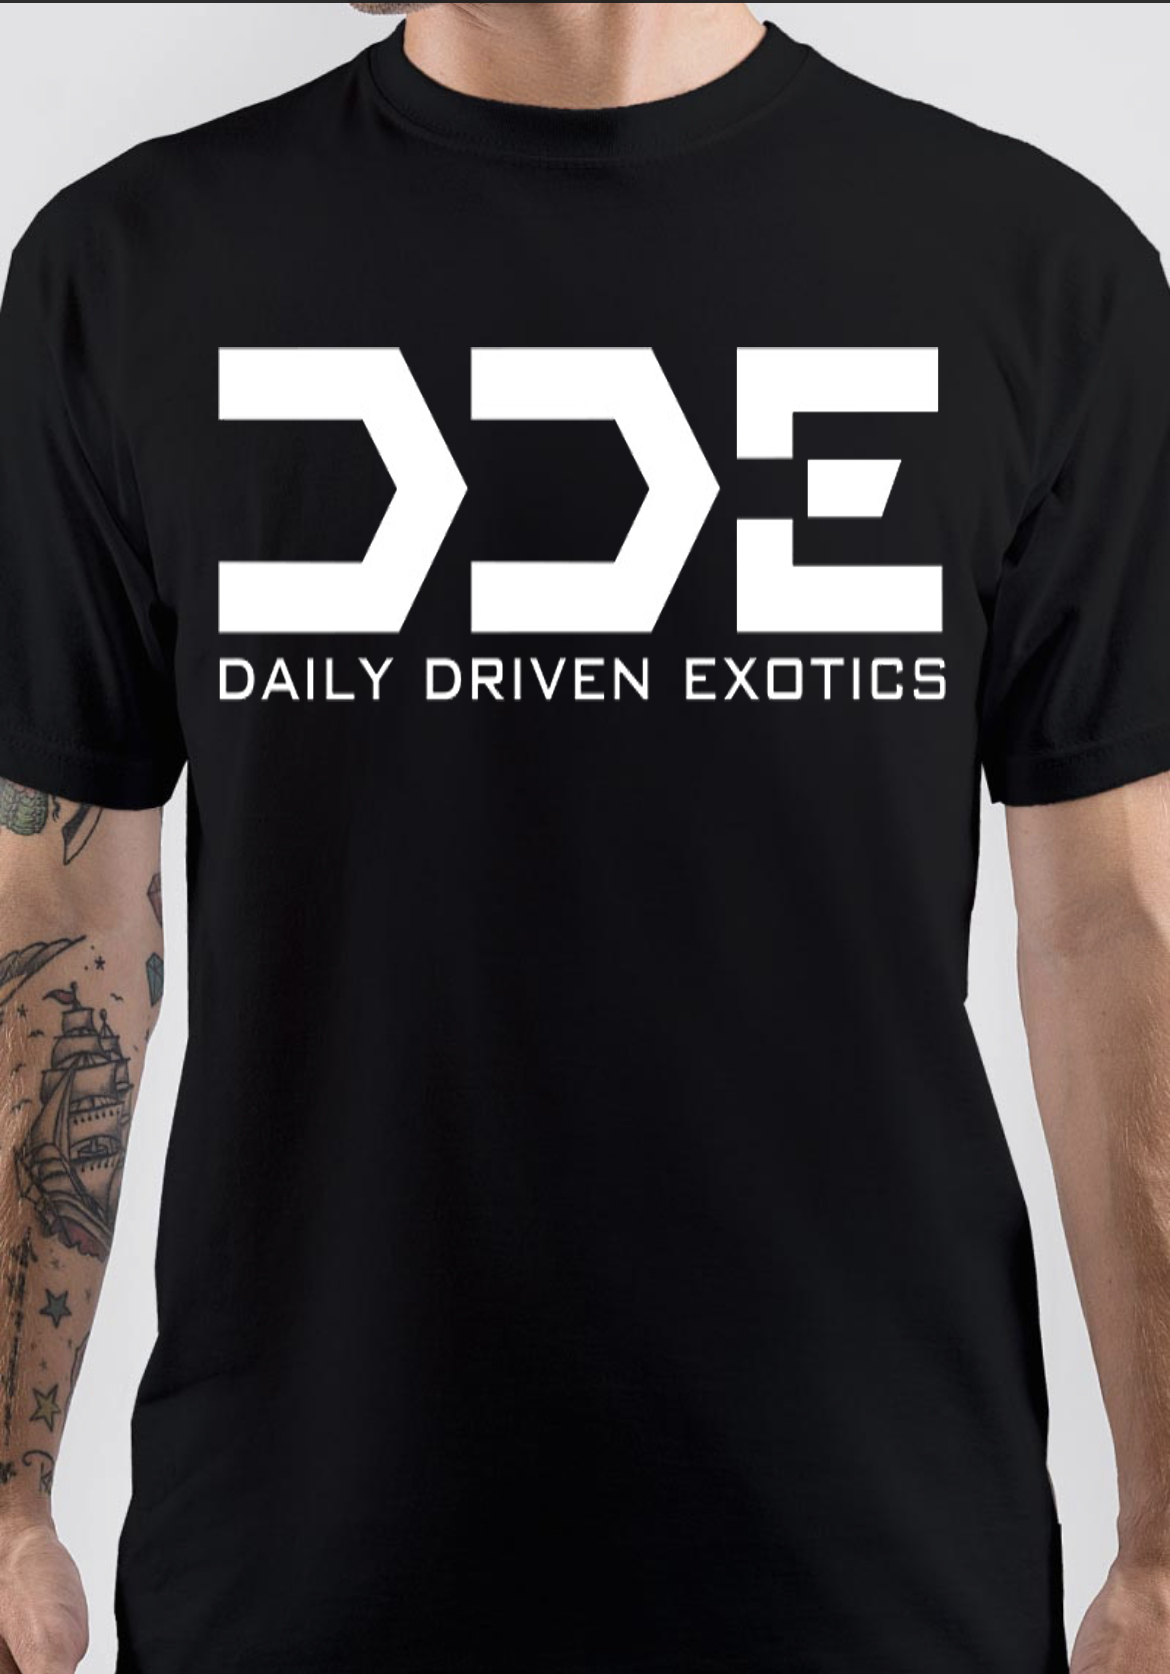 Daily Driven Exotics T-Shirt And Merchandise Archives - Swag Shirts